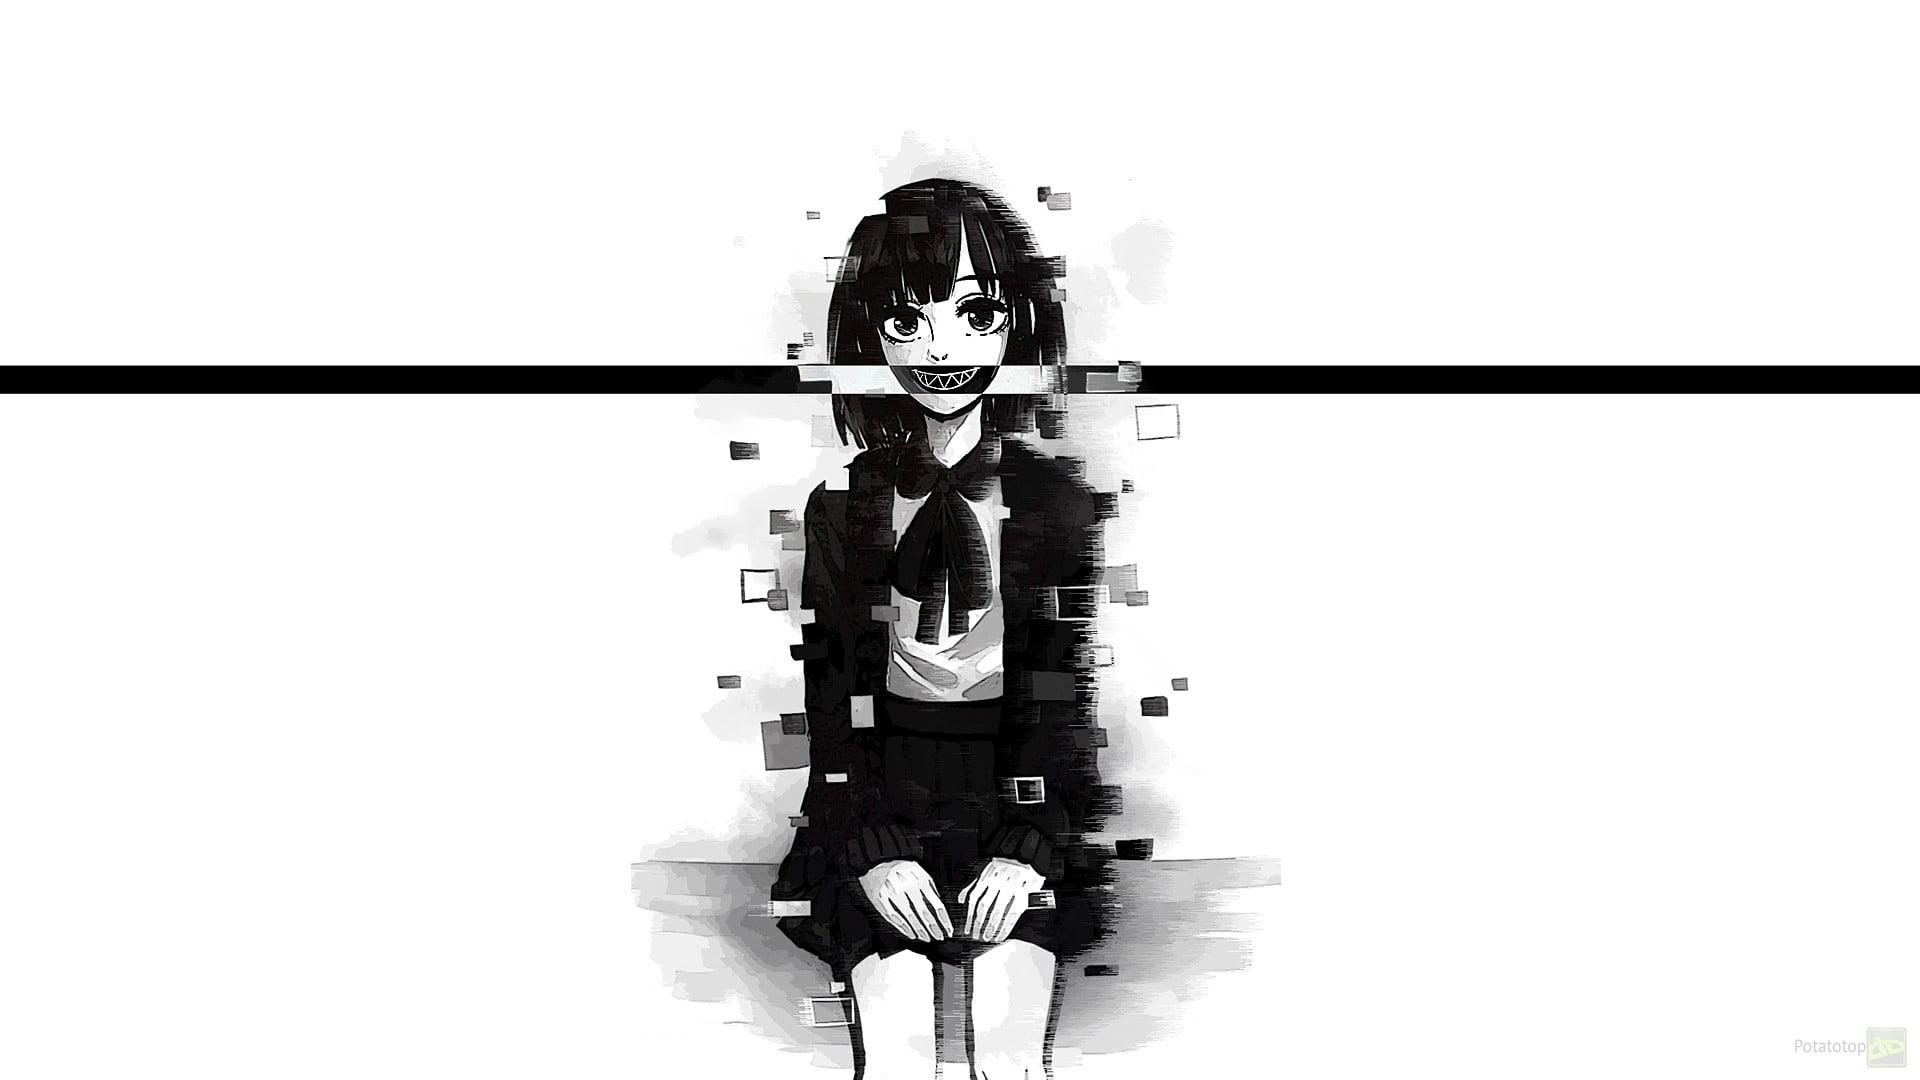 Glitched Anime Wallpaper HD by ucingmaot on DeviantArt